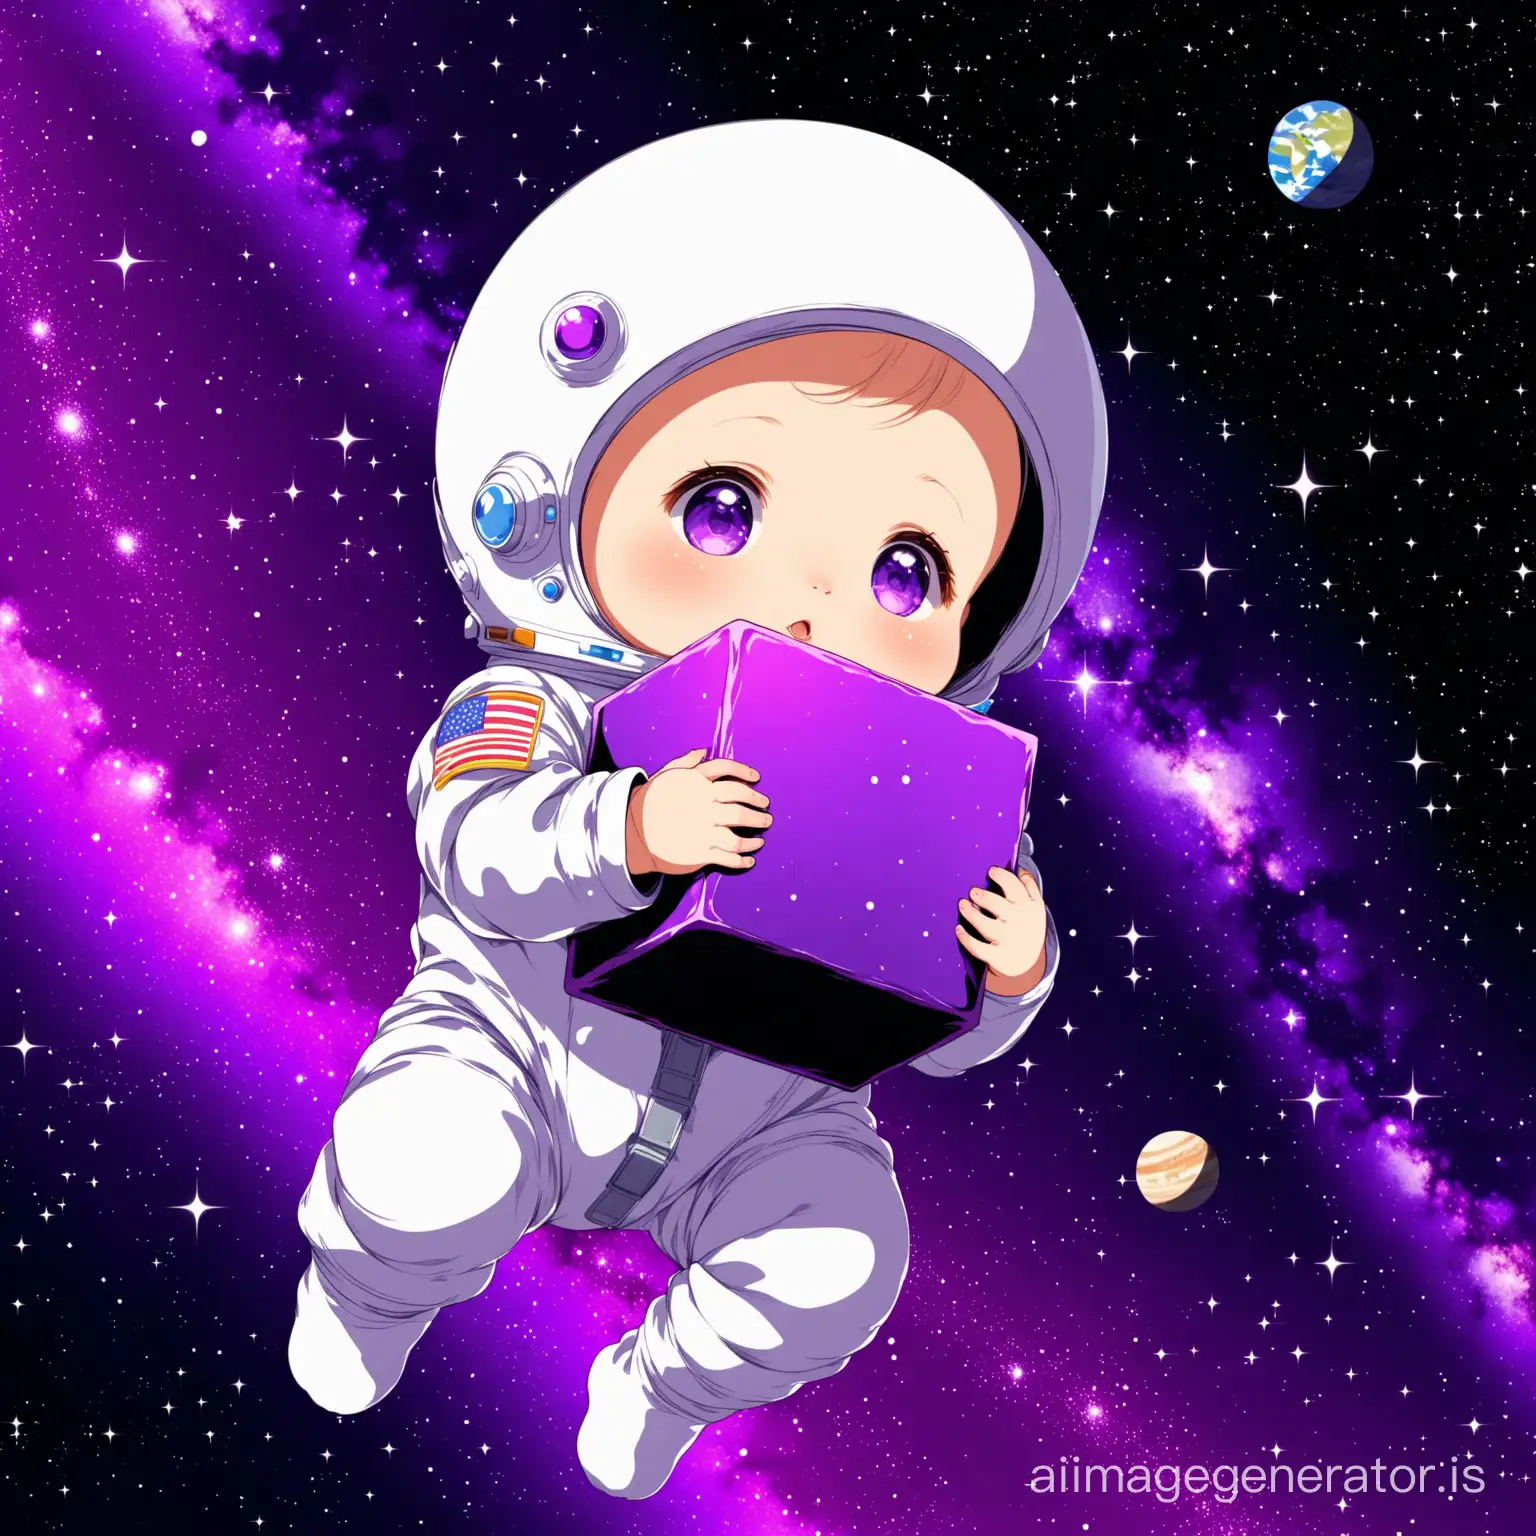 A baby holding a purple block in his arms. This child is in space